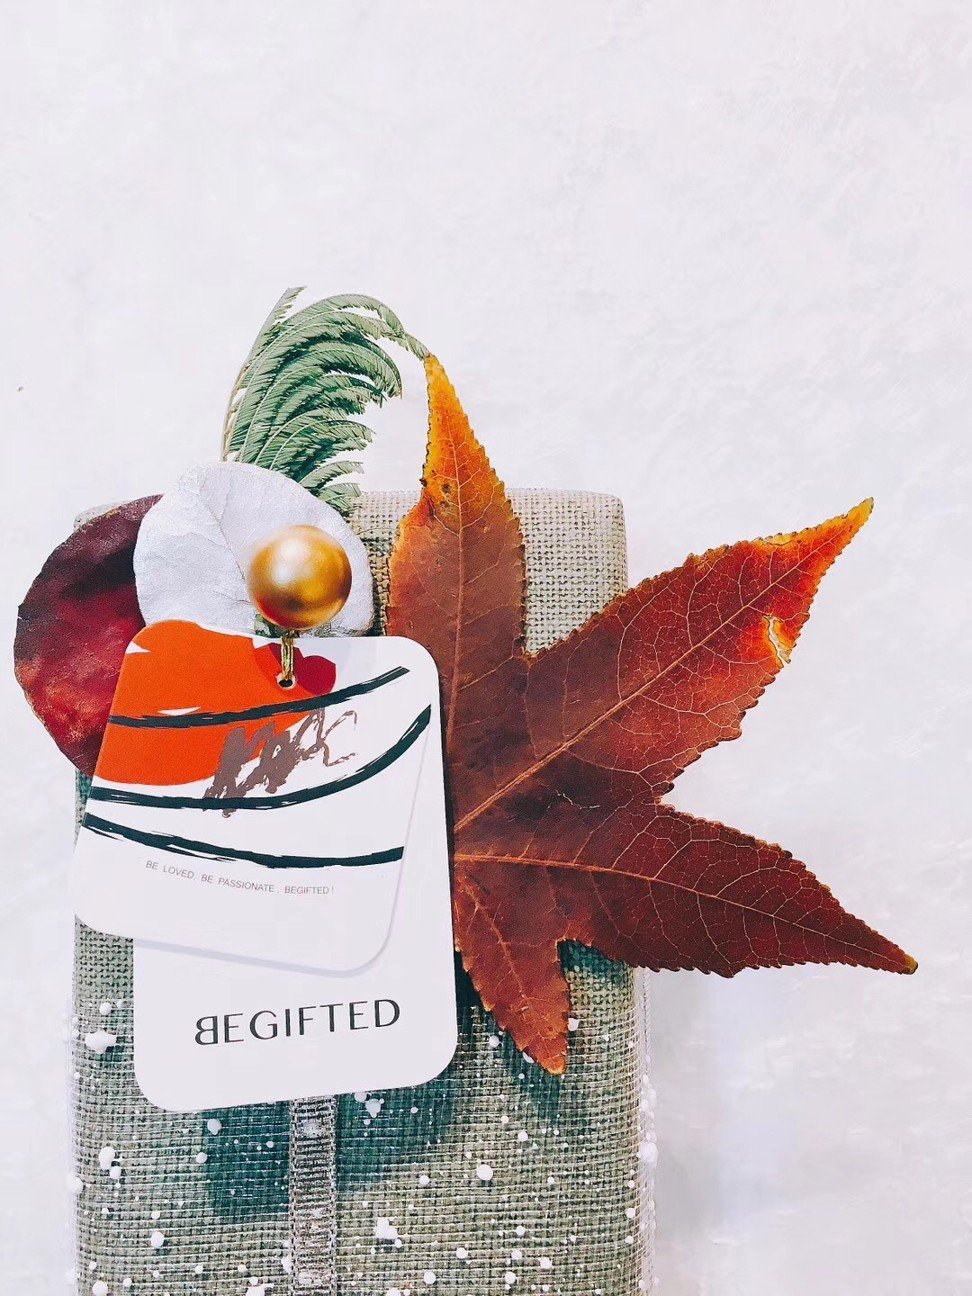 BeGifted is an e-commerce platform devoted to helping clients find the perfect gift for that special someone.